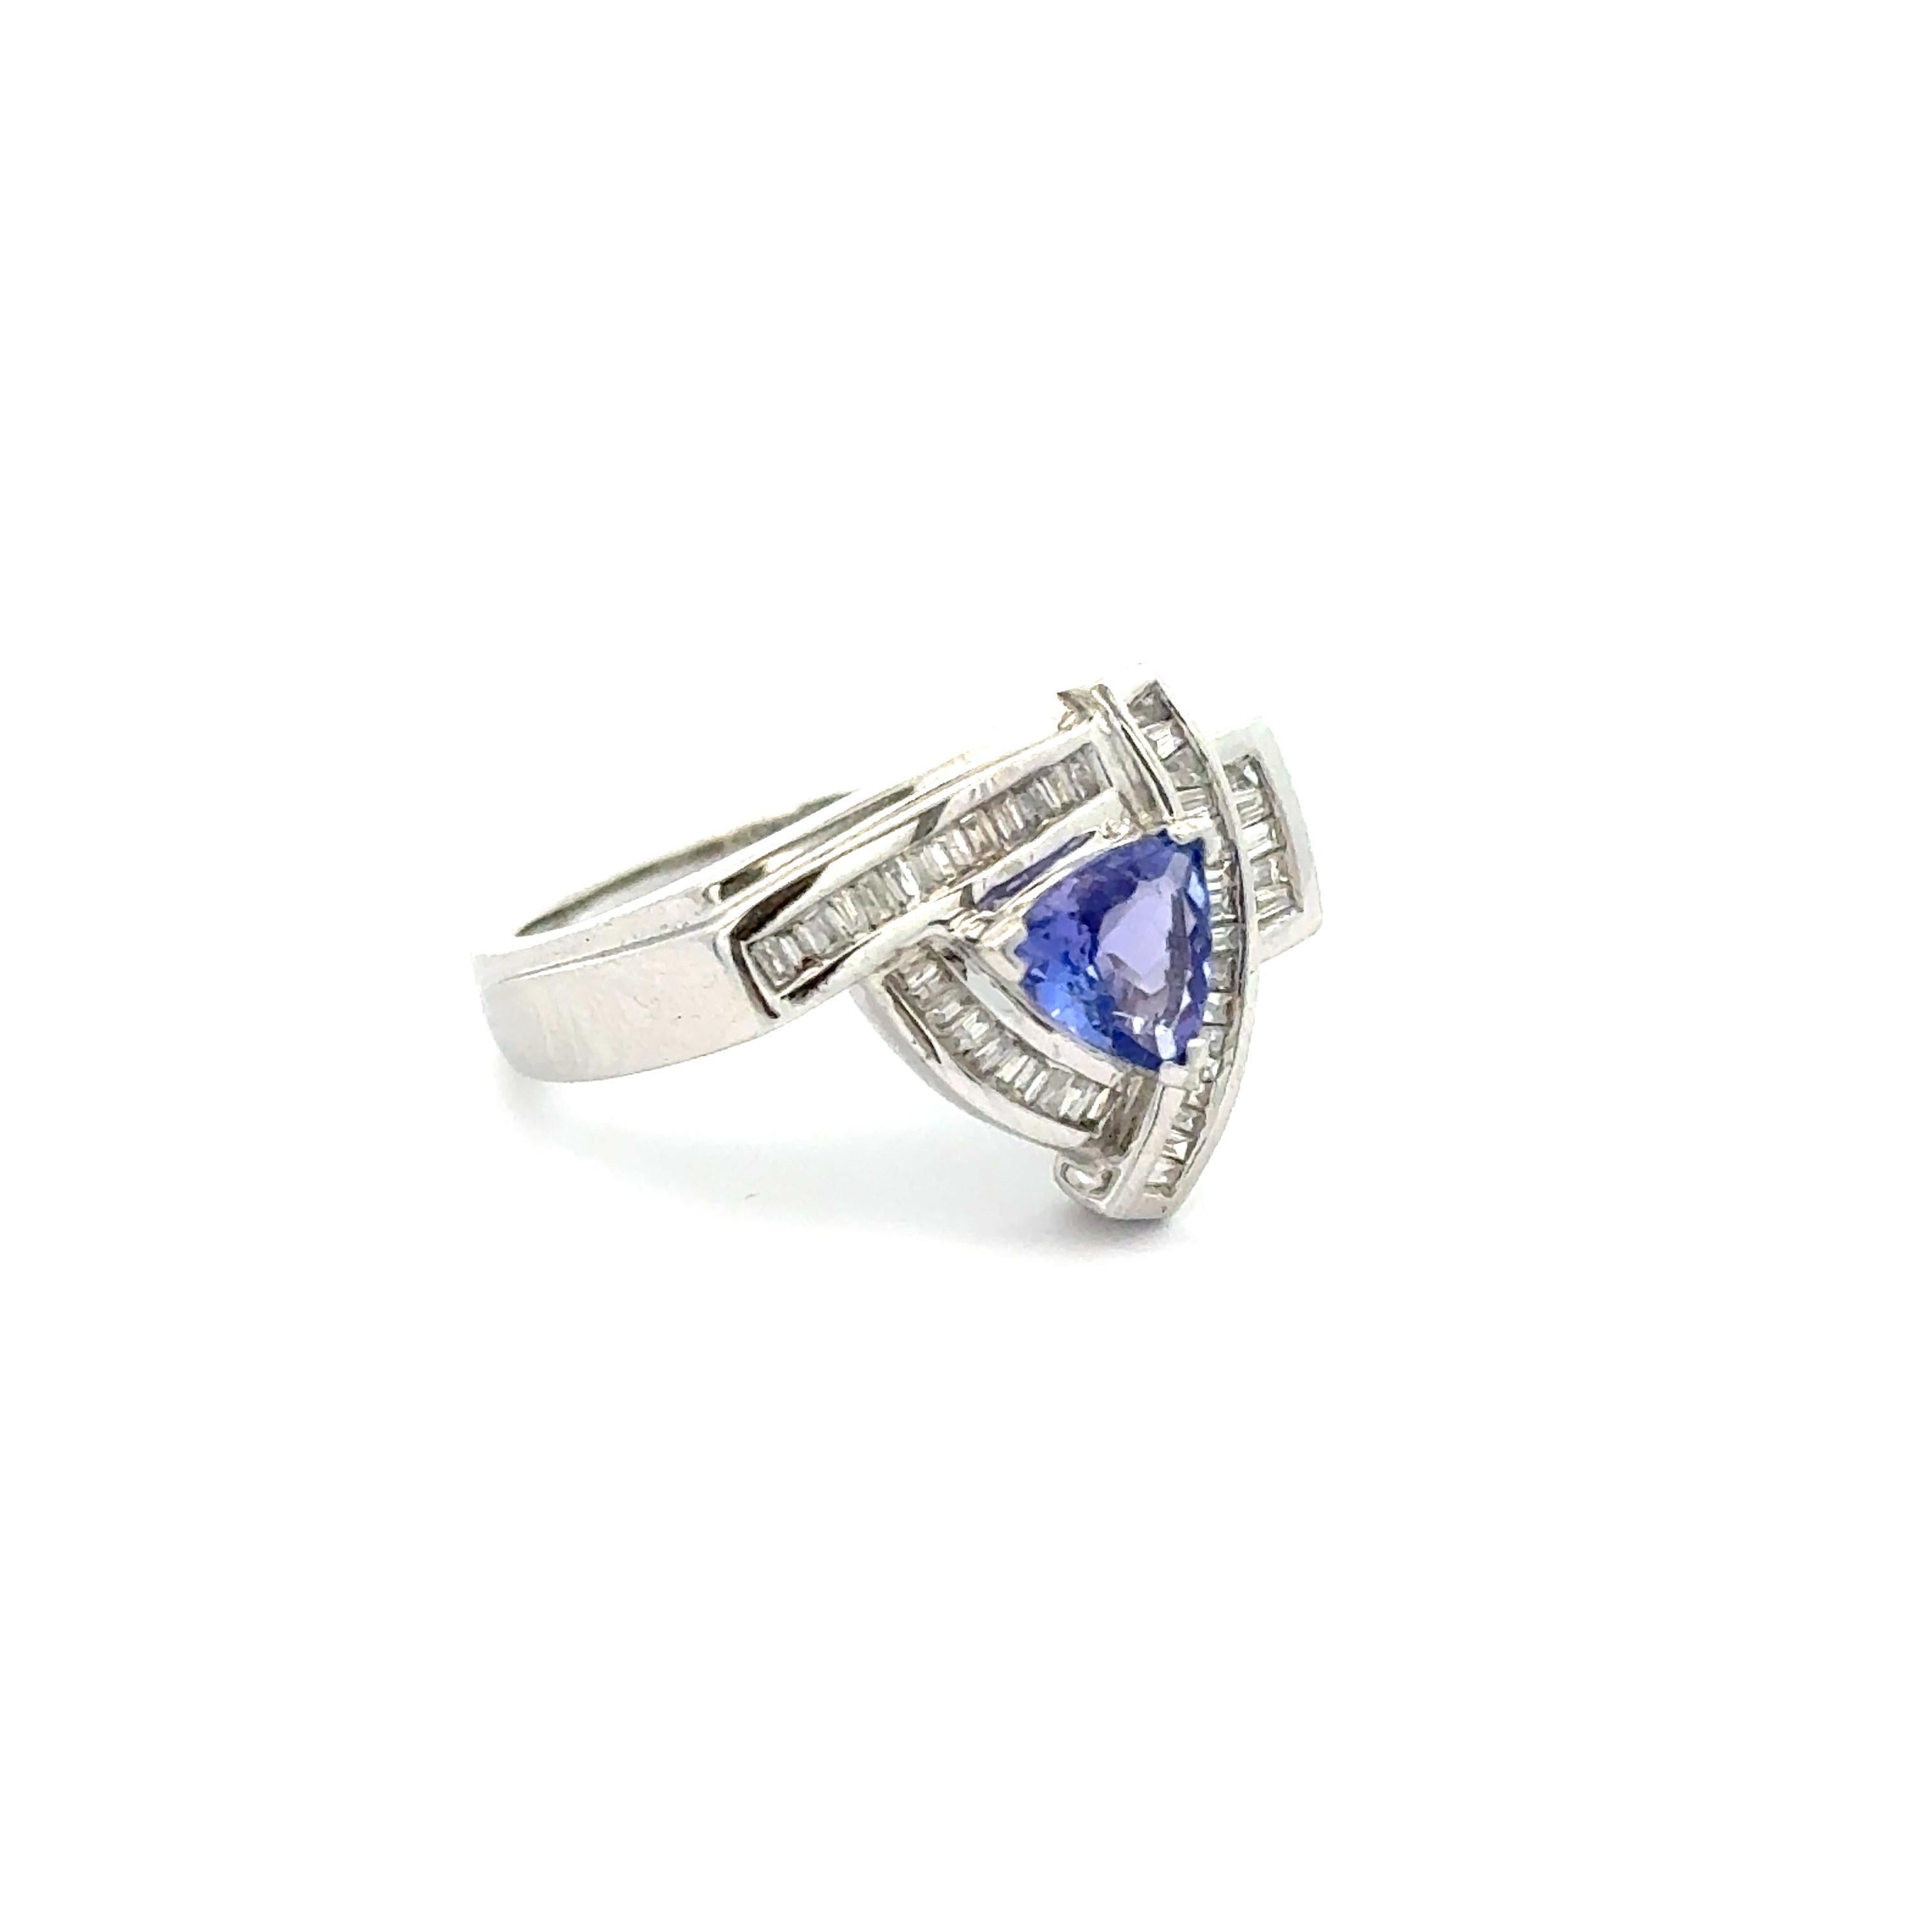 Vintage Tanzanite Inlaid Opal and Diamond Cluster 14K White Gold Ring 6.5 Grams In New Condition For Sale In Miami, FL